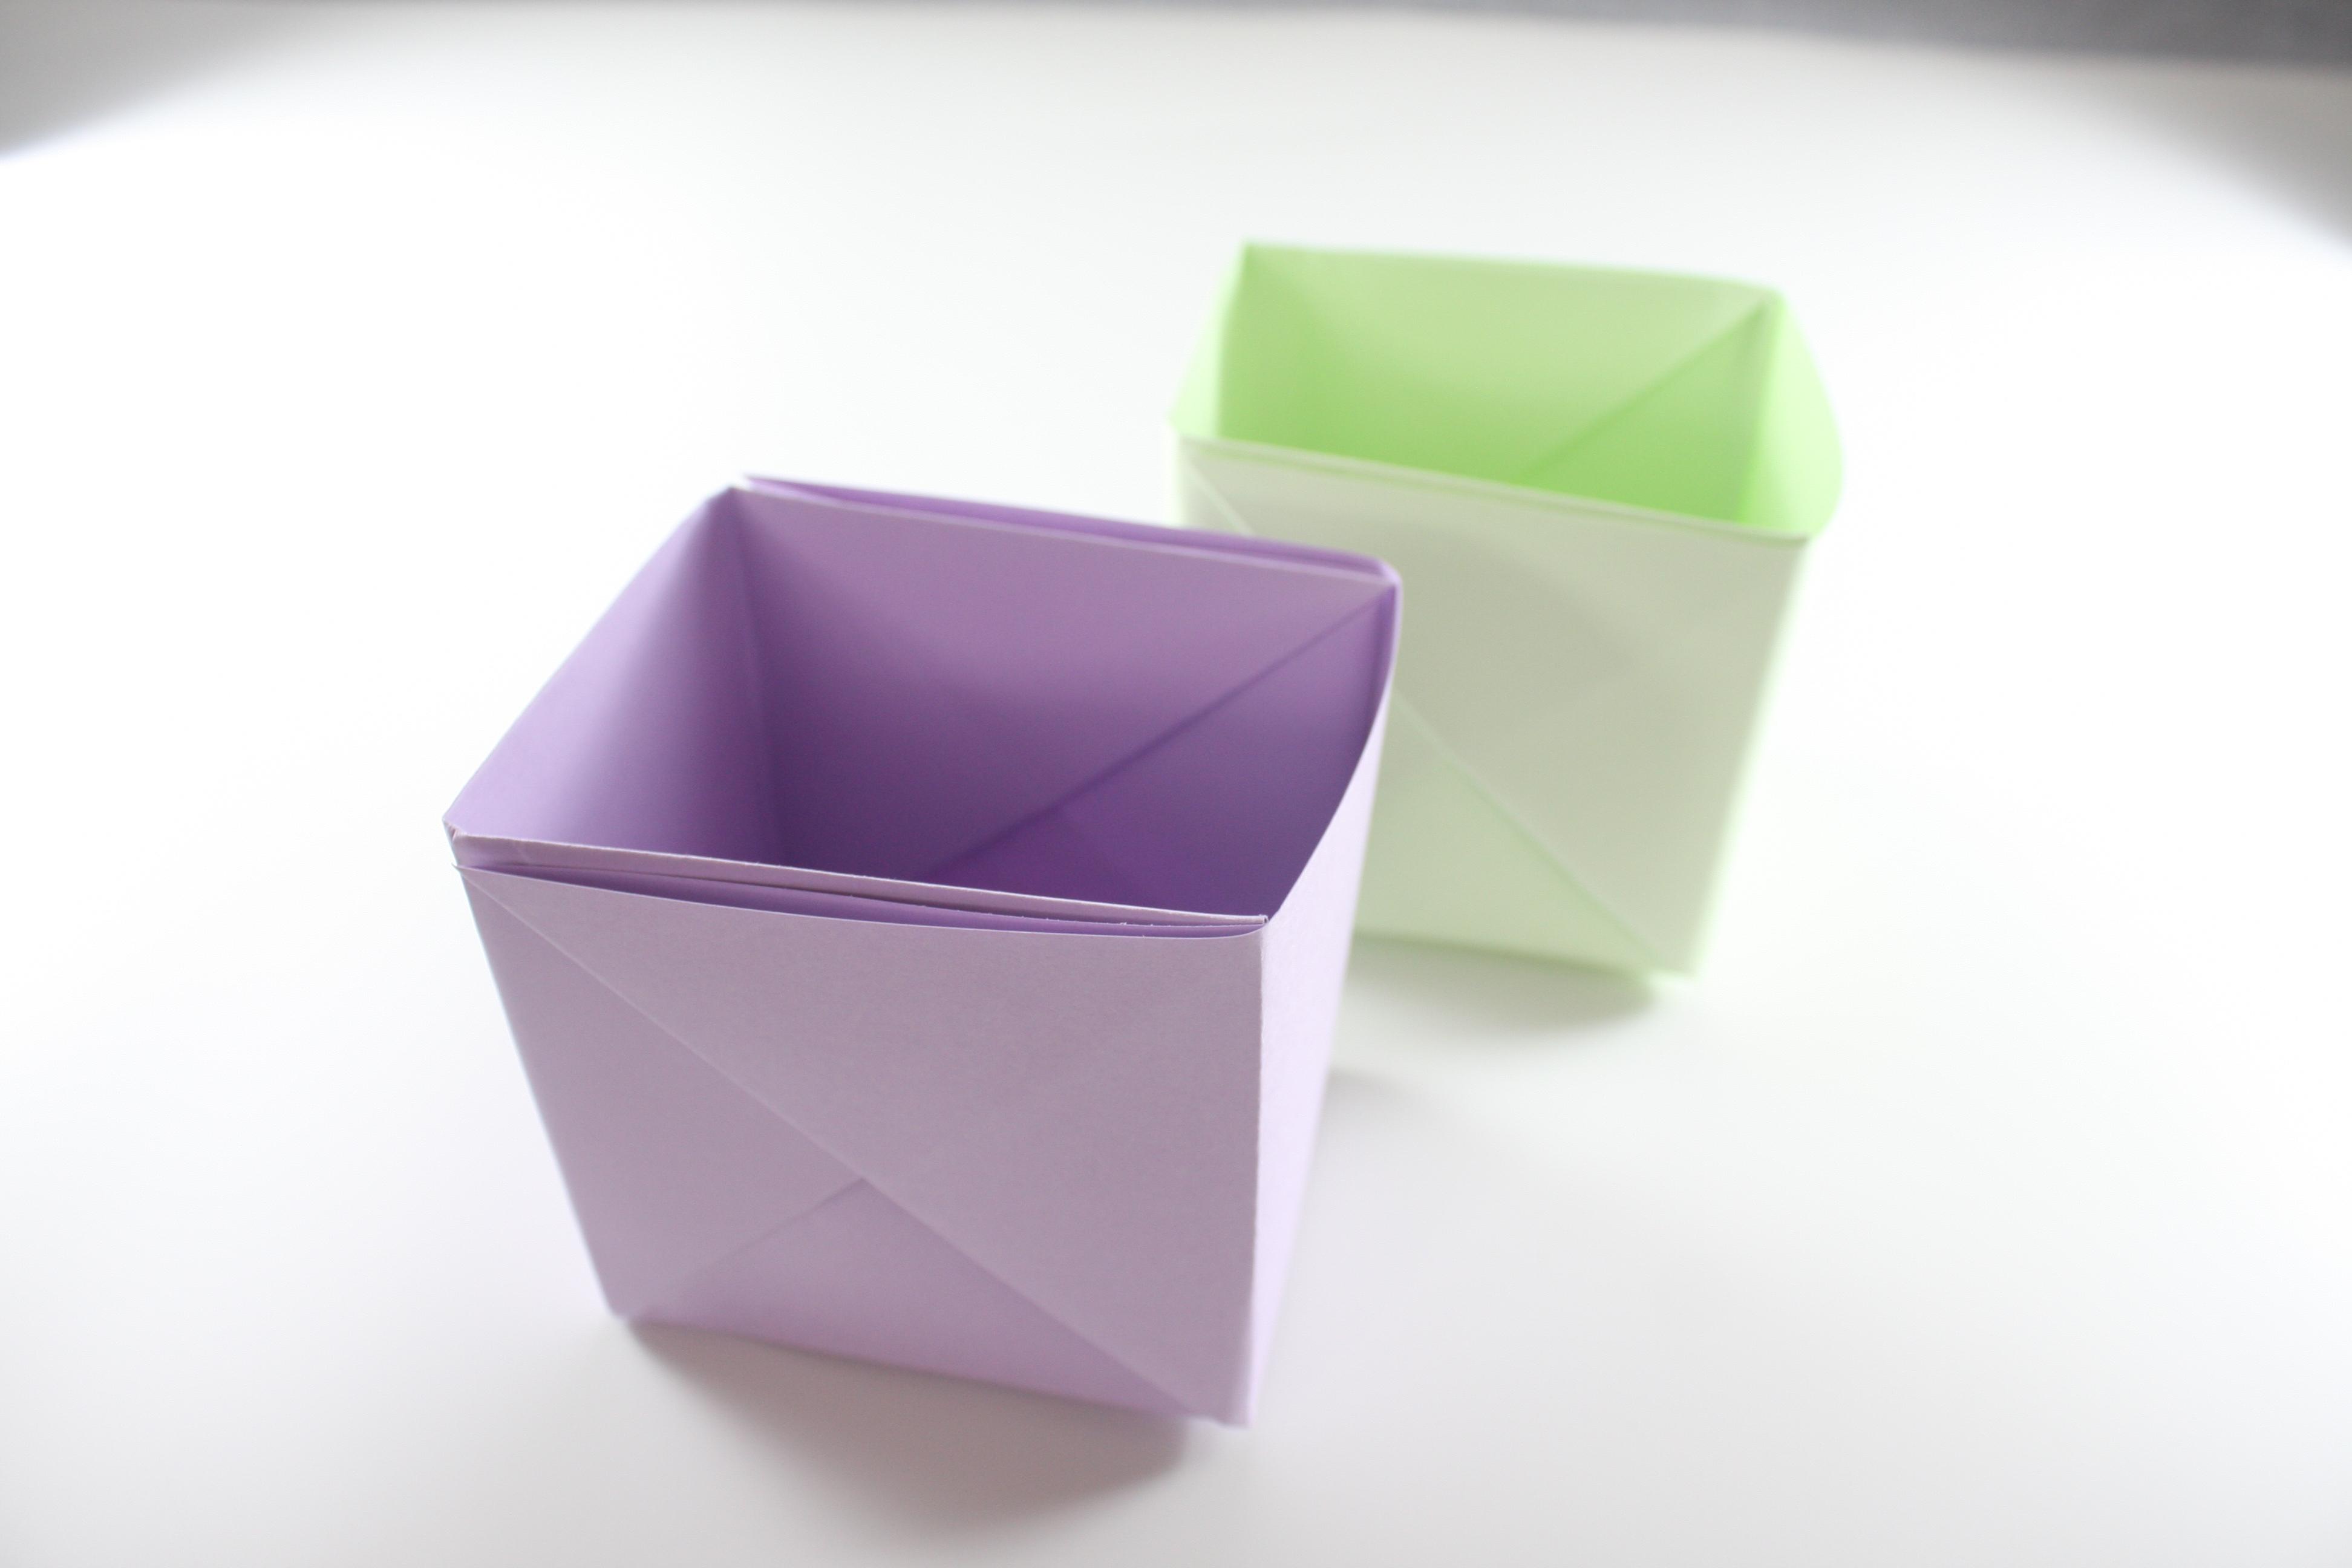 How to Make an Origami Box | 17 boxes instructions and diagram.